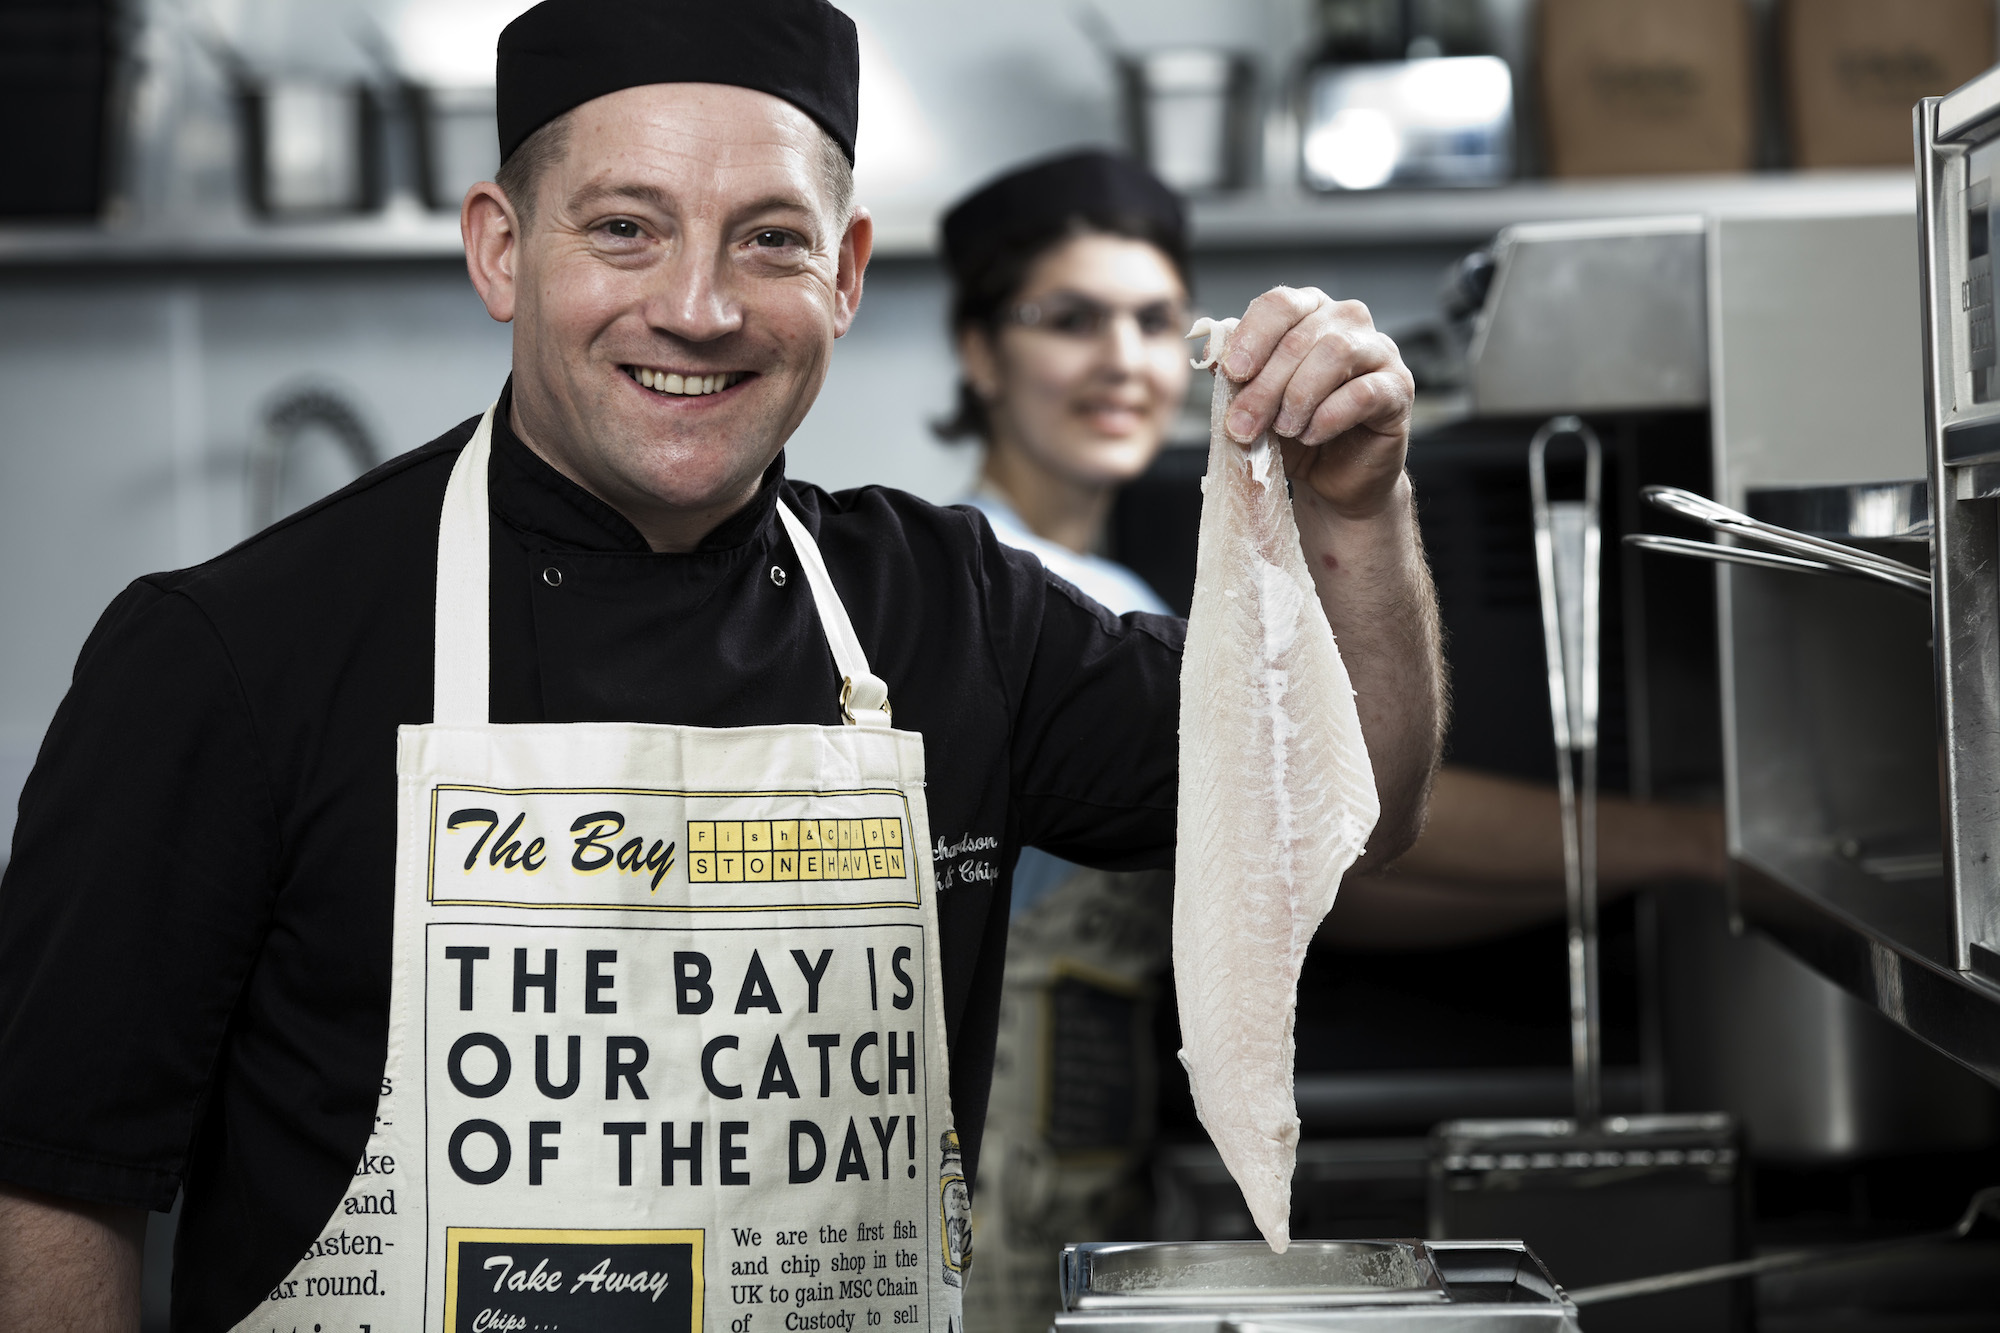 Calum Richardson, owner and chef at The Bay Fish & Chips